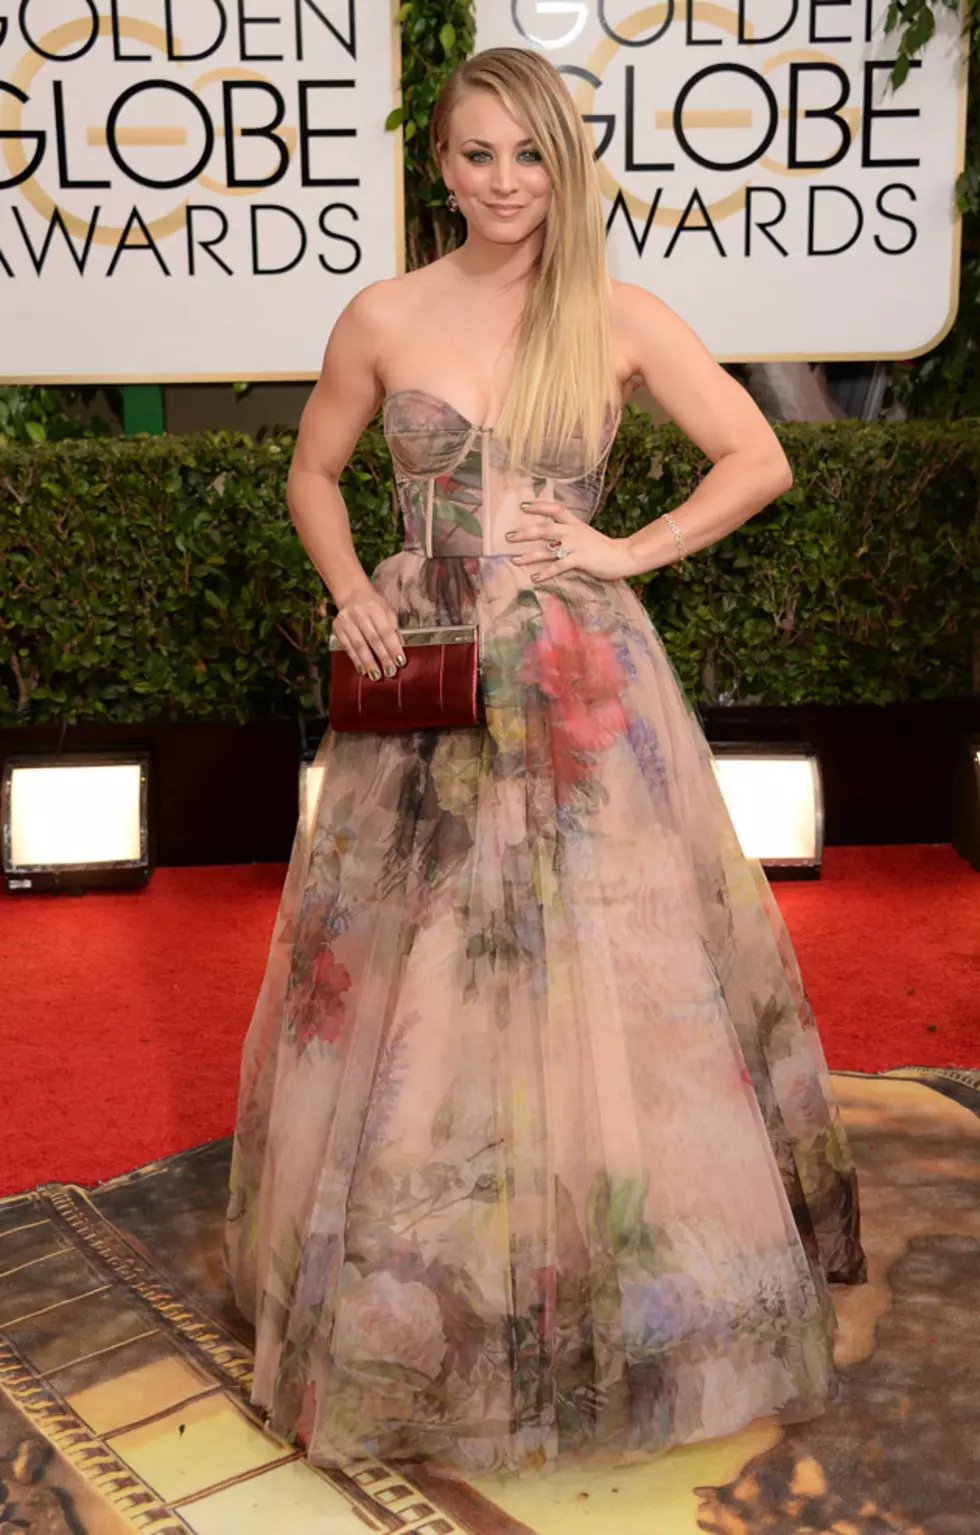 Kaley Cuoco Wears Floral Dress on the 2014 Golden Globes Red Carpet [PHOTOS]